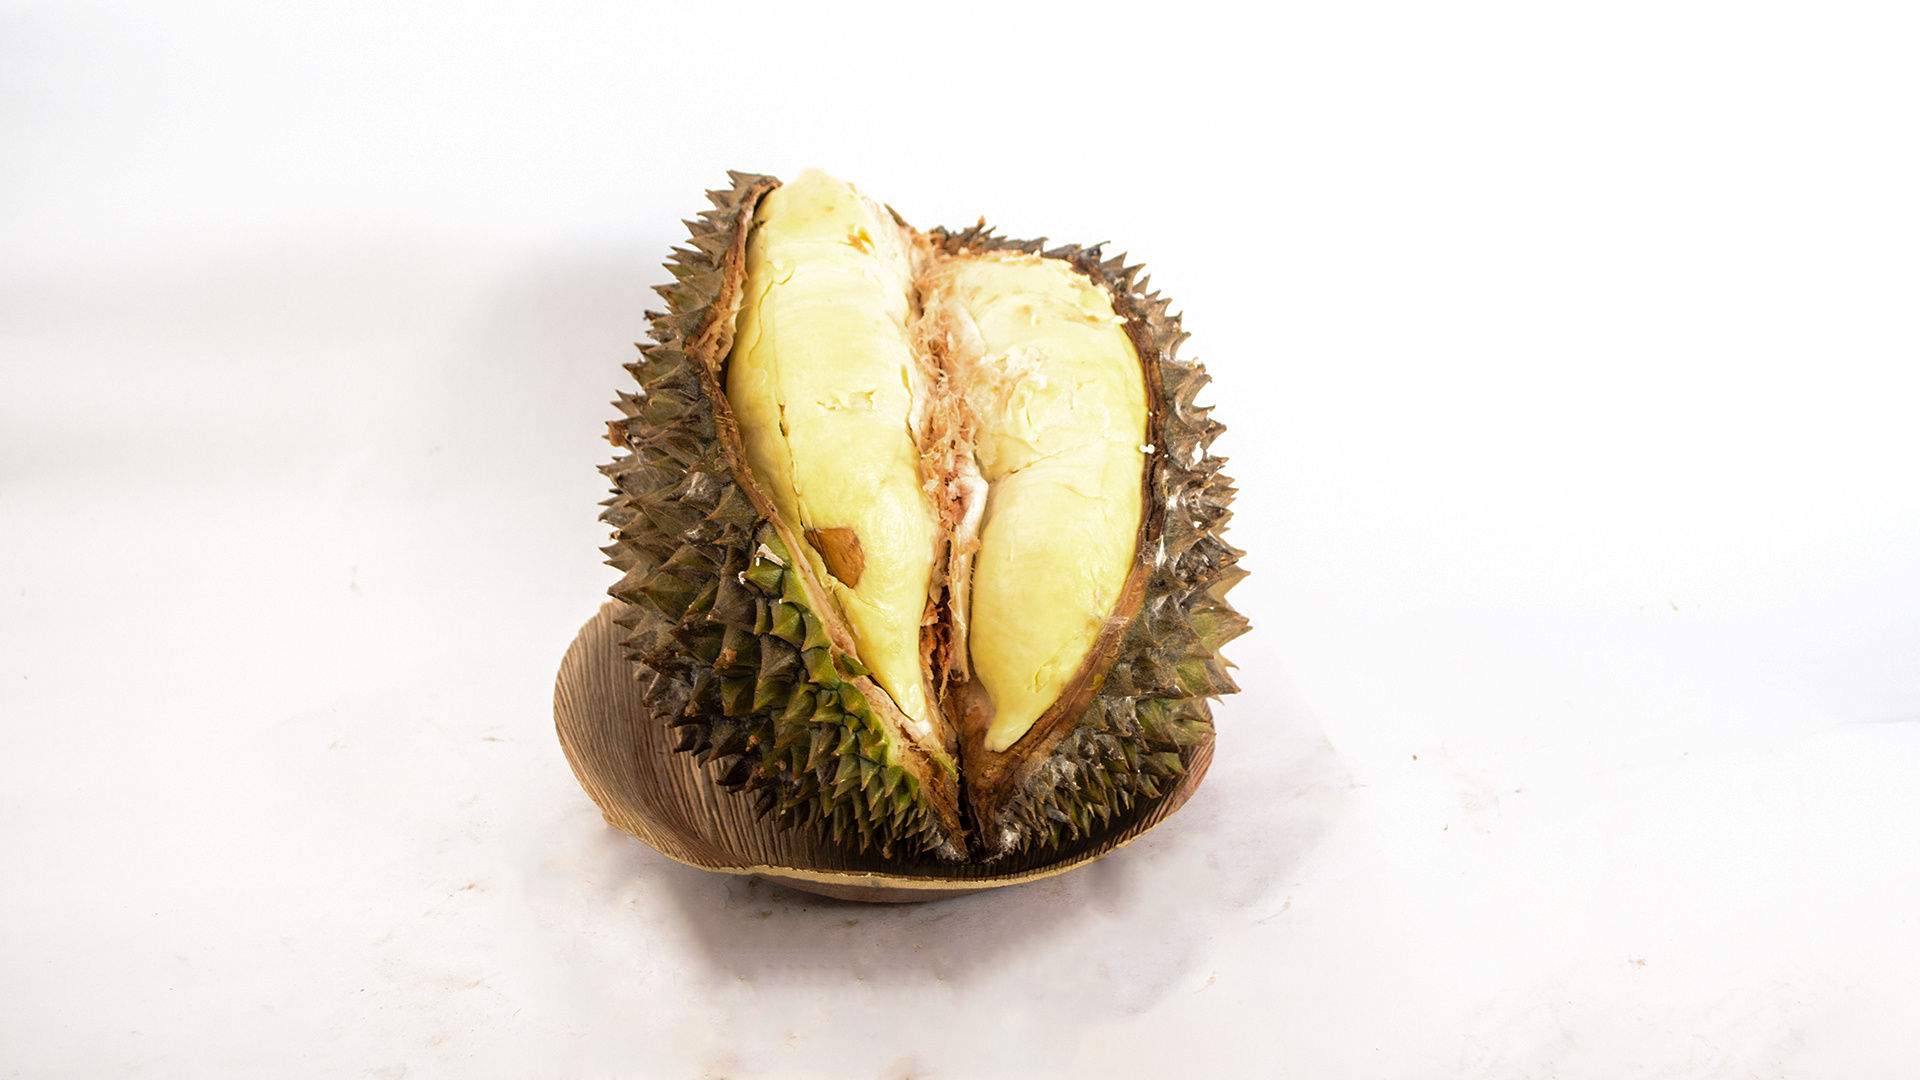 Durian: A peak harvest season occurs from June to August, A seasonal fruit. 1920x1080 Full HD Background.